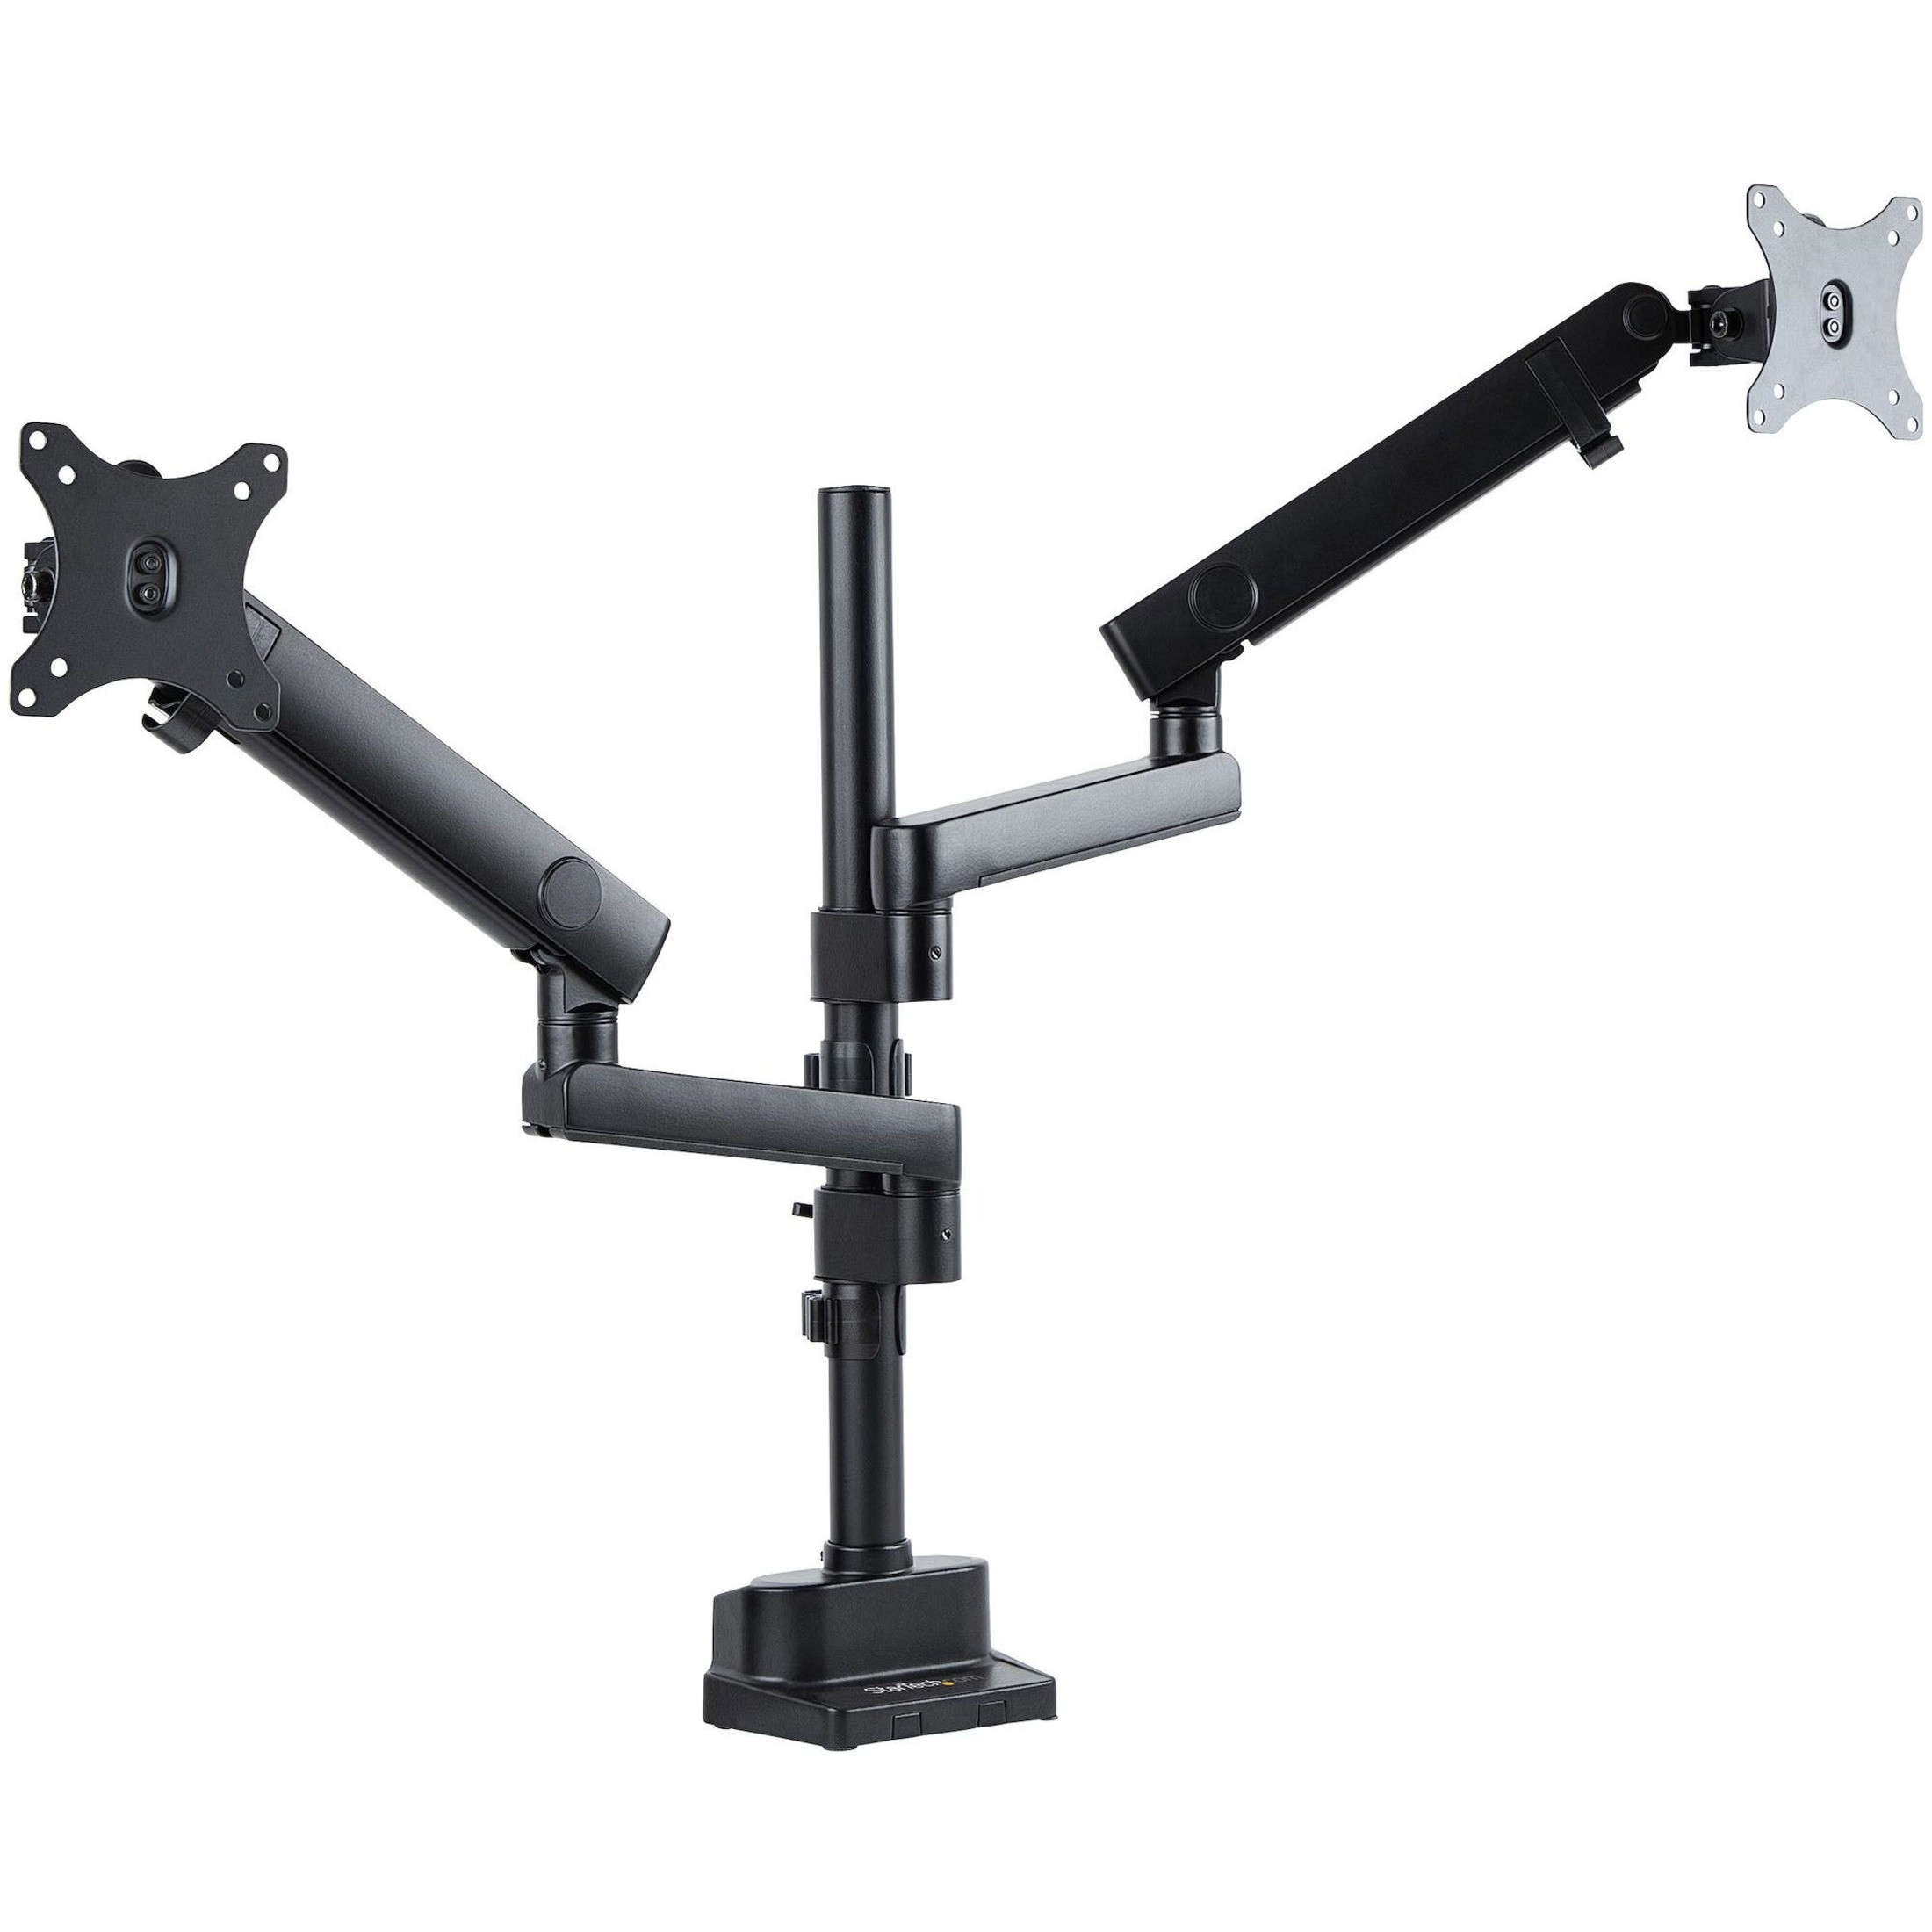 Desk Mount Dual Monitor Arm - Full Motion Monitor Mount for 2x VESA  Displays up to 32 (17.6lb/8kg) - Vertical Stackable Arms - Height